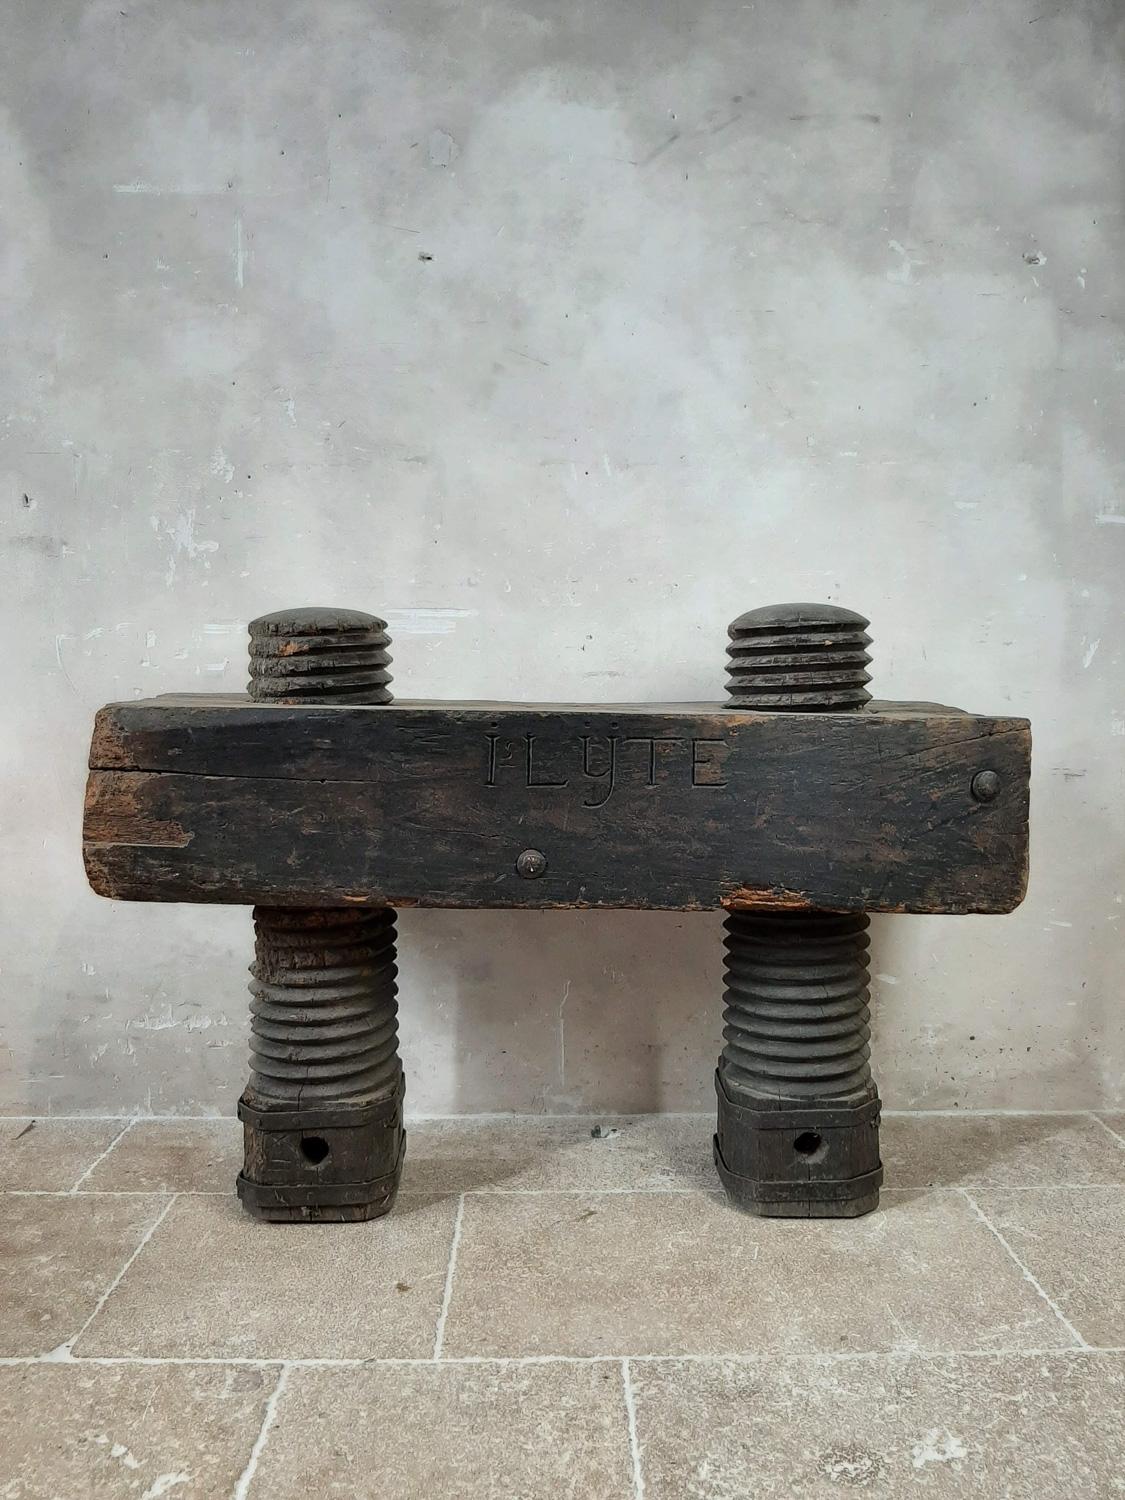 Large 17th century Dutch oak press with hand carved screw wire. The block can be screwed up and down. Whe up, it can function as a side table / console table, when screwed down it could function as a bench / hall bench. The simple design makes it